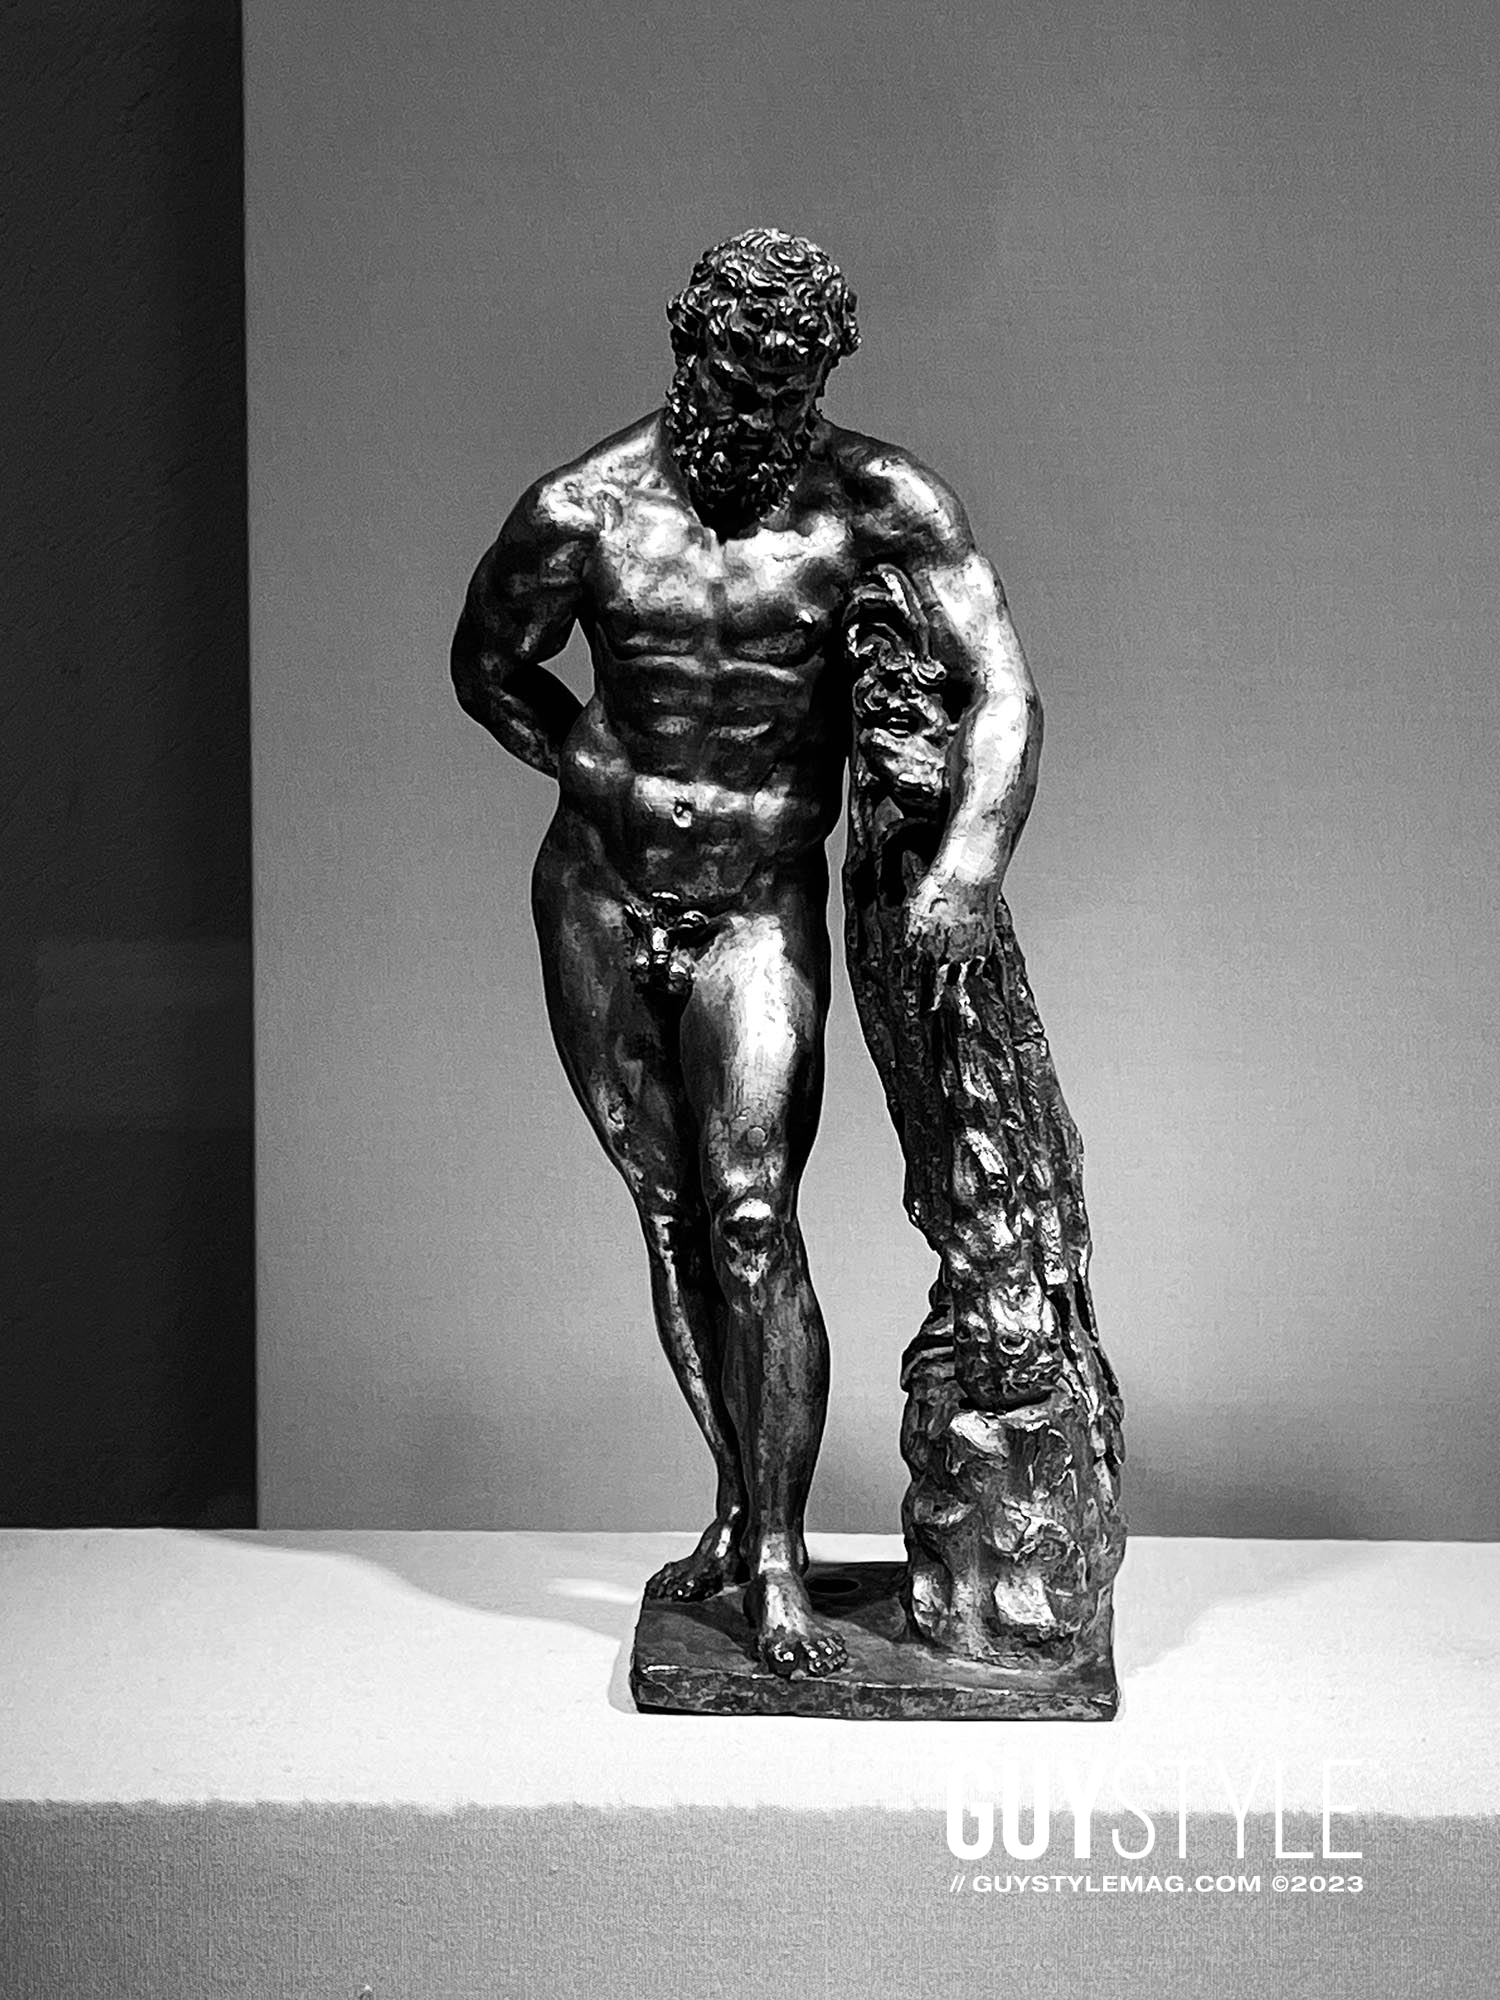 The Nude Male Form in Ancient Art: From Gifted Heroic Legends to Minuscule Reality of the Modern Men – by Maxwell Alexander, MA, BFA, Photographer and Certified Fitness Trainer and Bodybuilding Coach